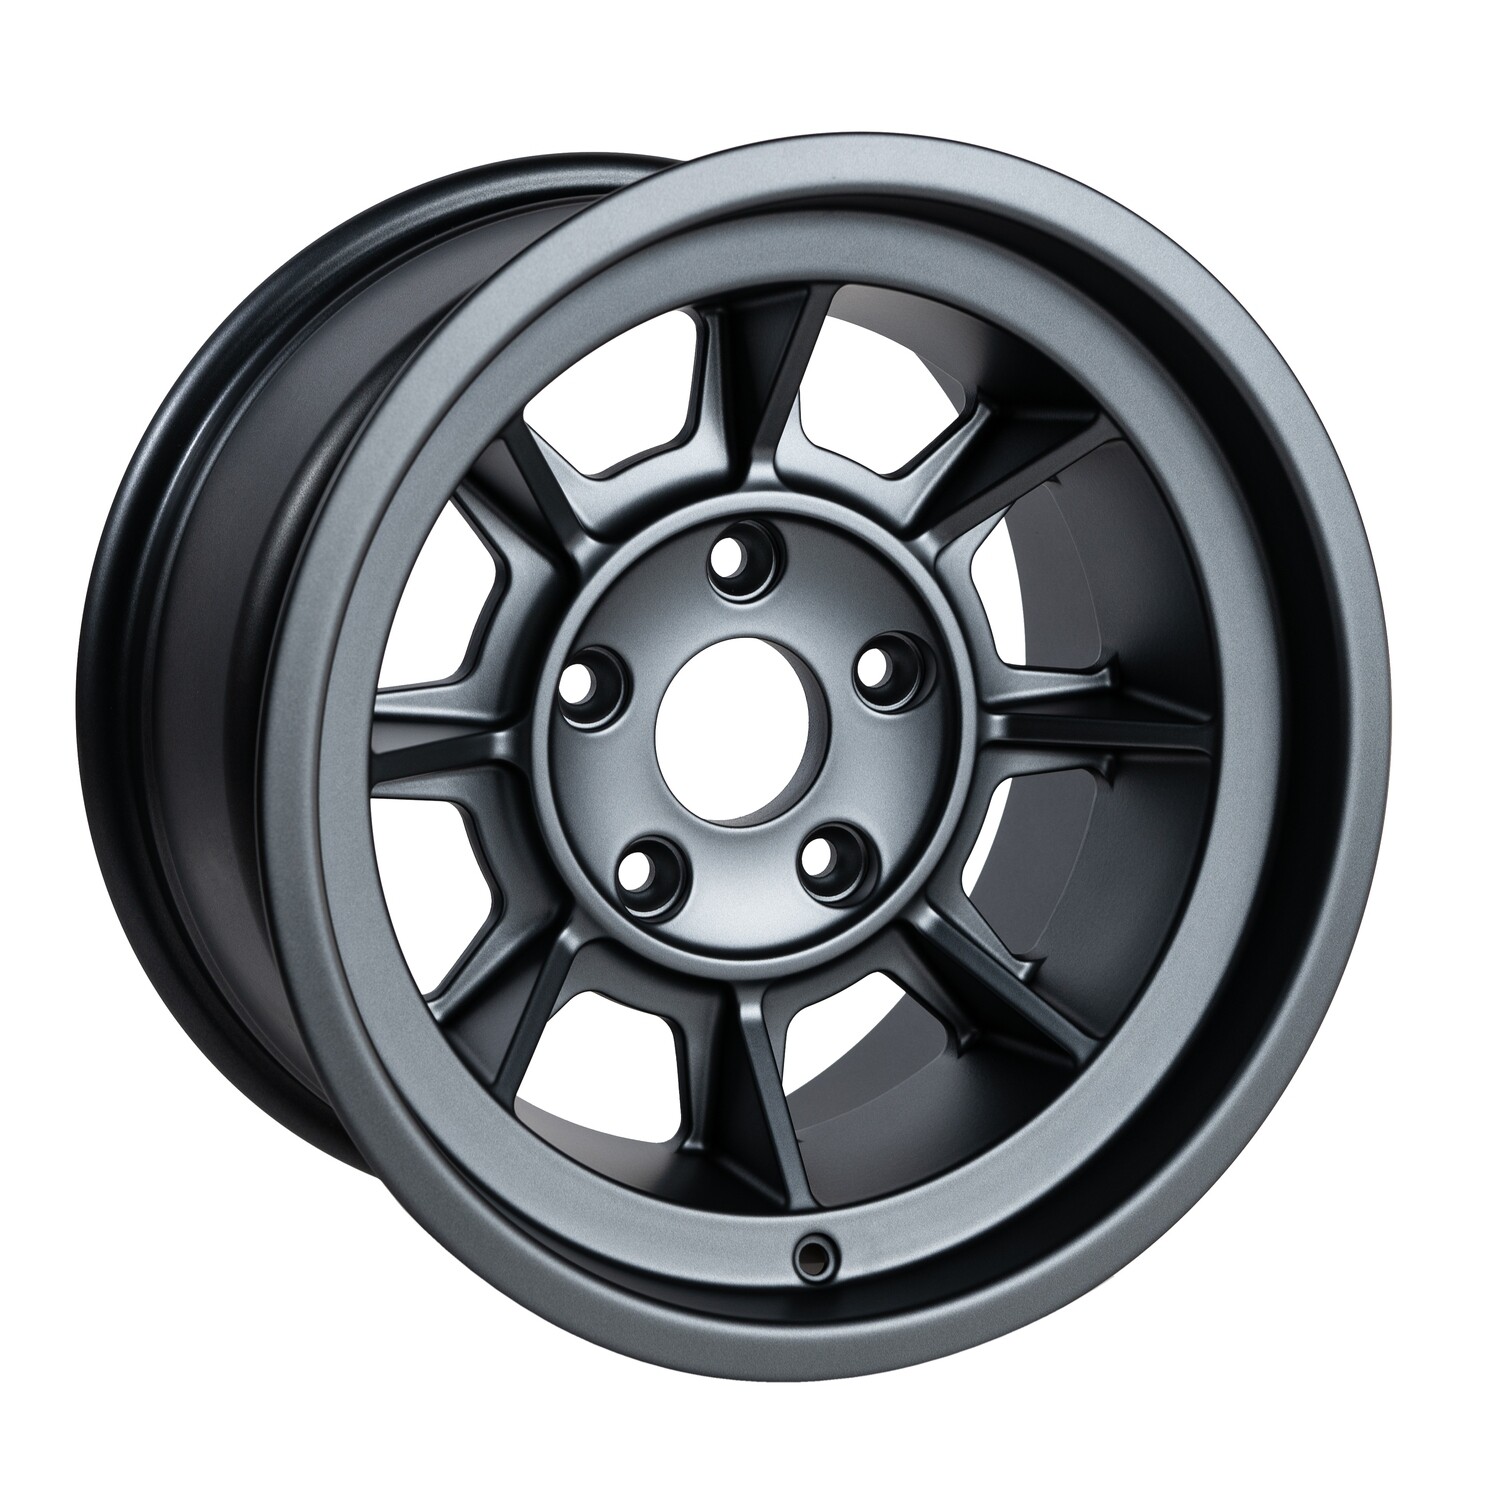 PAG1690 Satin Anthracite 16 x 9